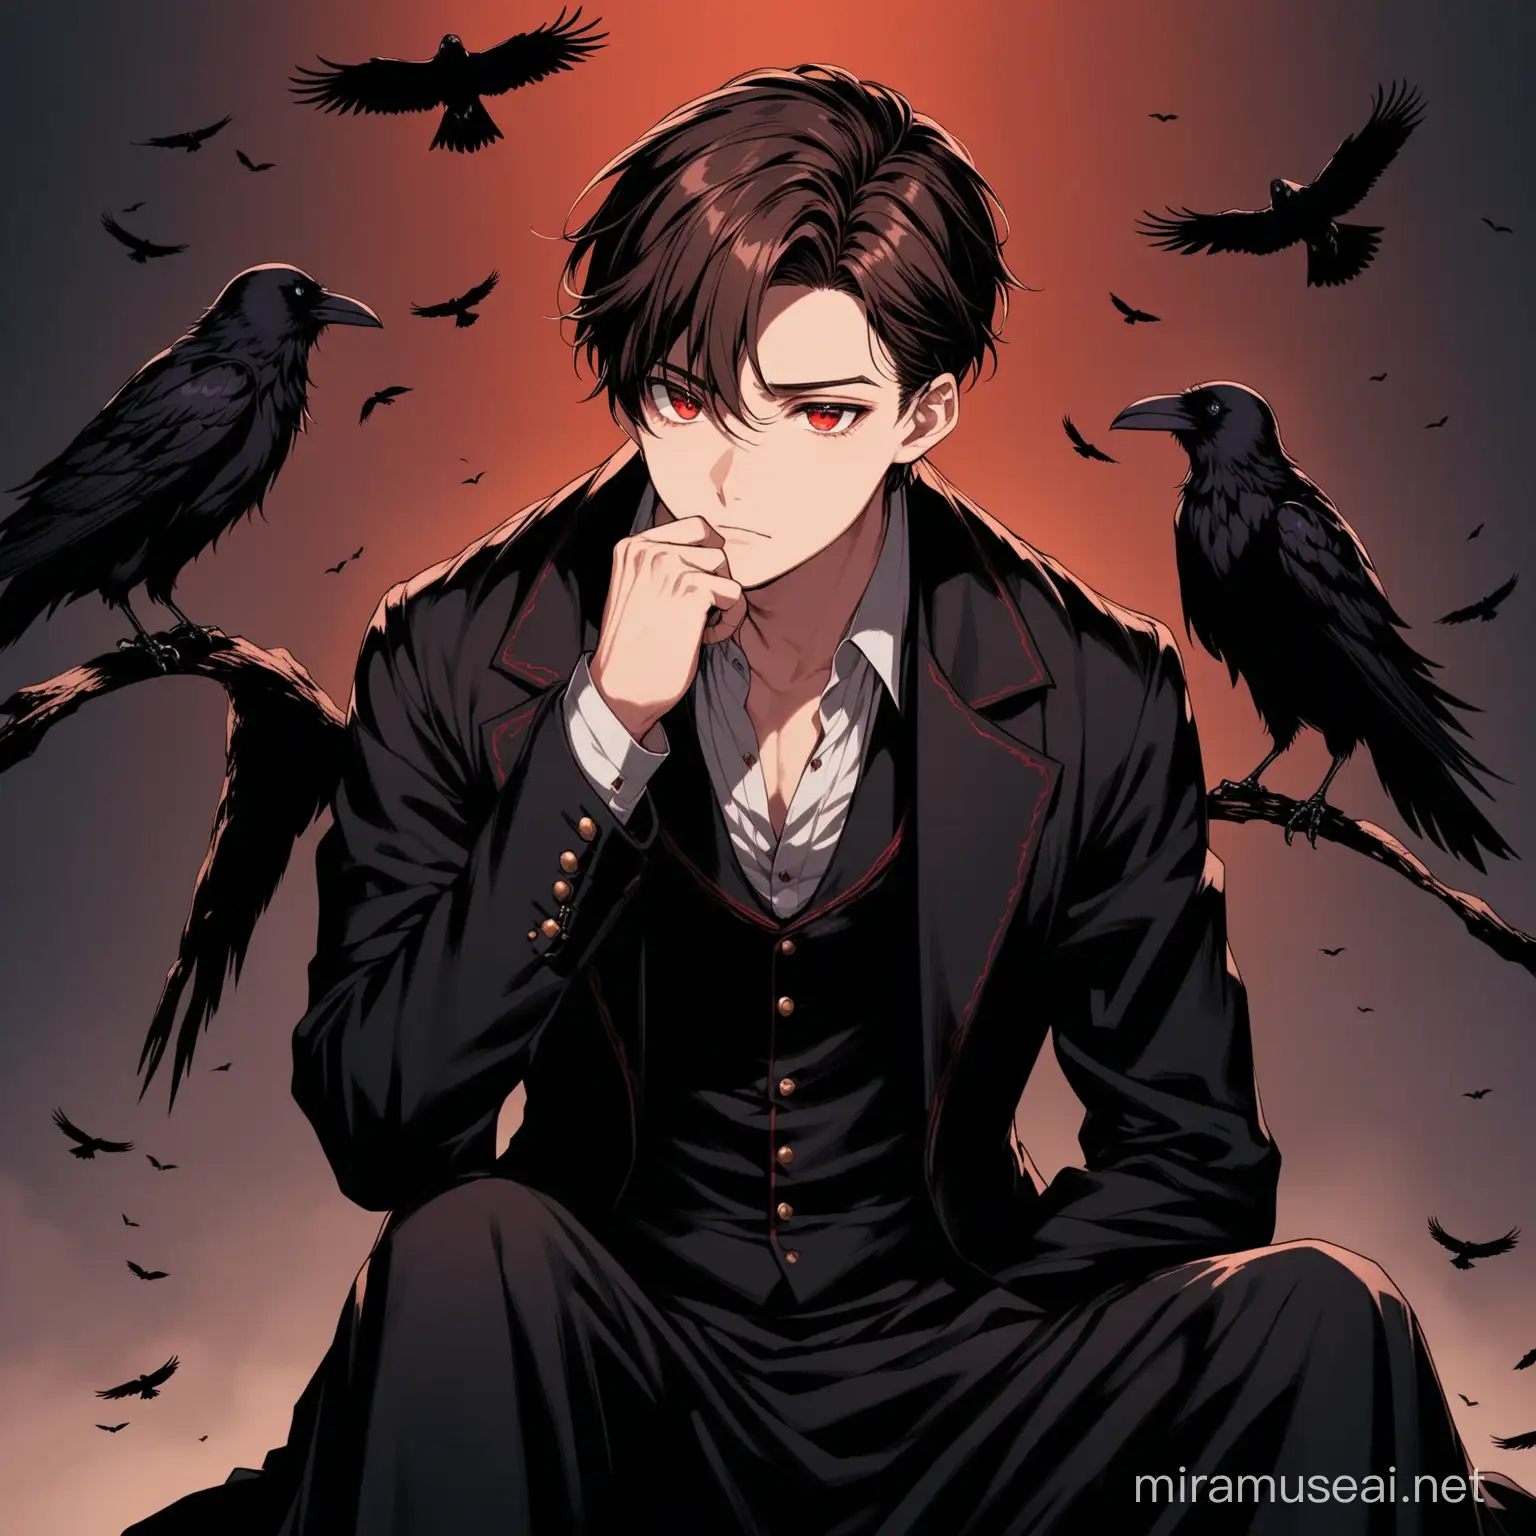 Mysterious Anime Boy with Red and Hazel Eyes and Crow in Dark Atmosphere